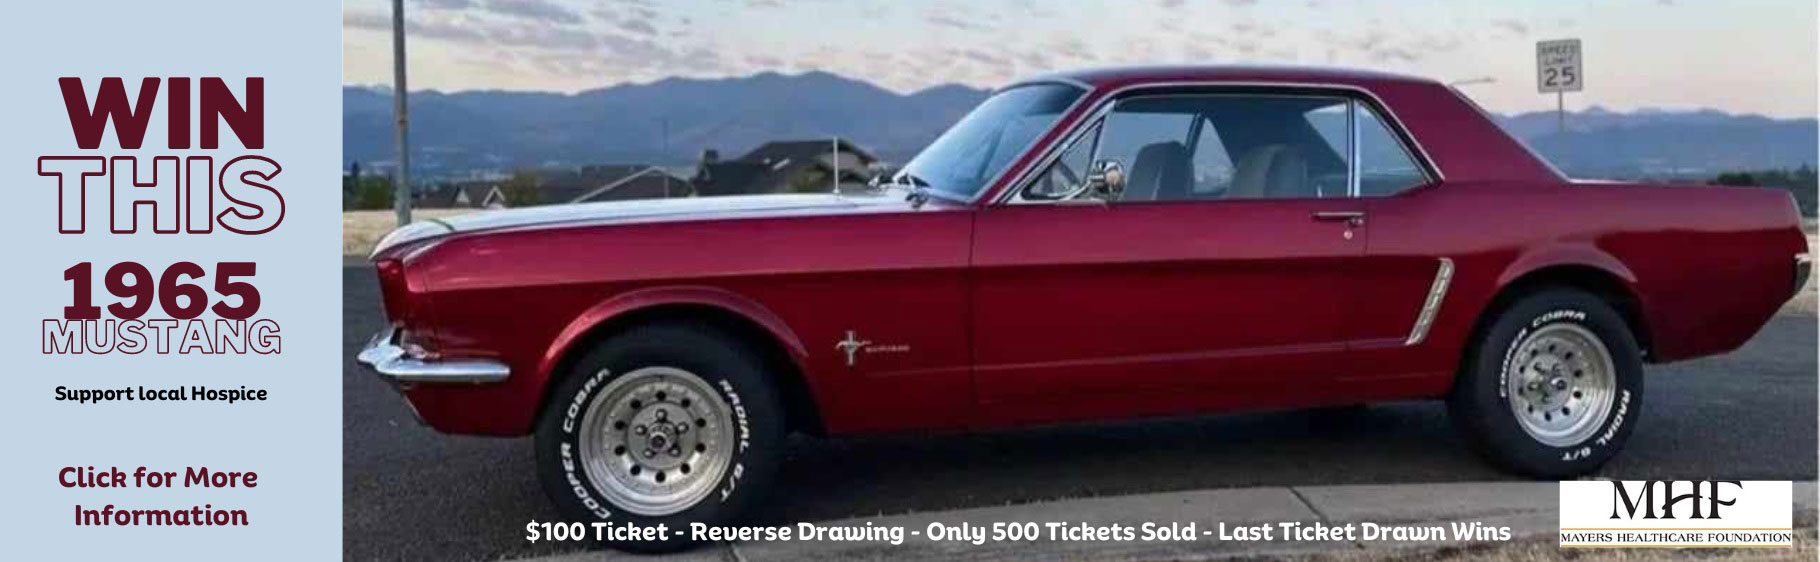 Win this 1965 Ford Mustang.
Support local Hospice.
$100 ticket - Reverse drawing - Only 500 tickets sold - Last ticket drawn wins.
Click for more information.